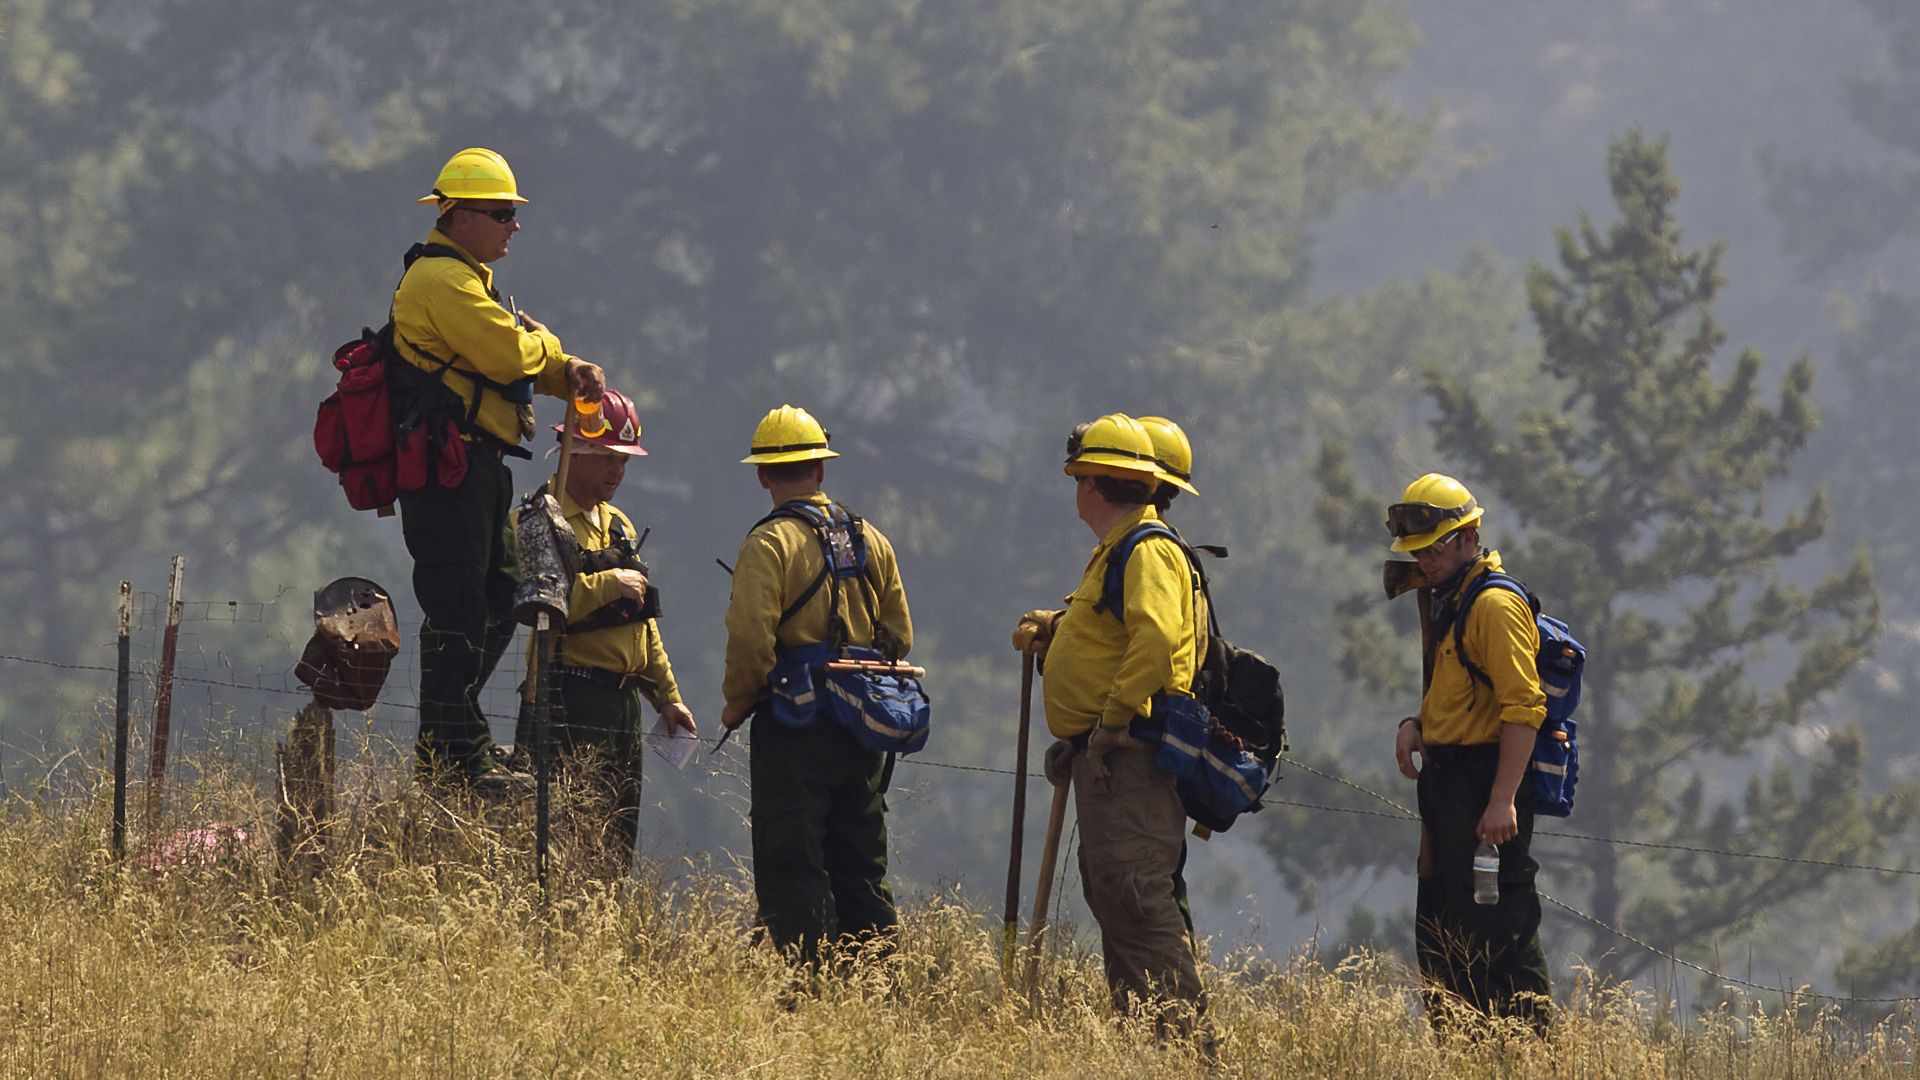 A group of firefighters stand on dry ground with trees in the background, as smoke clouds the view in the distance.